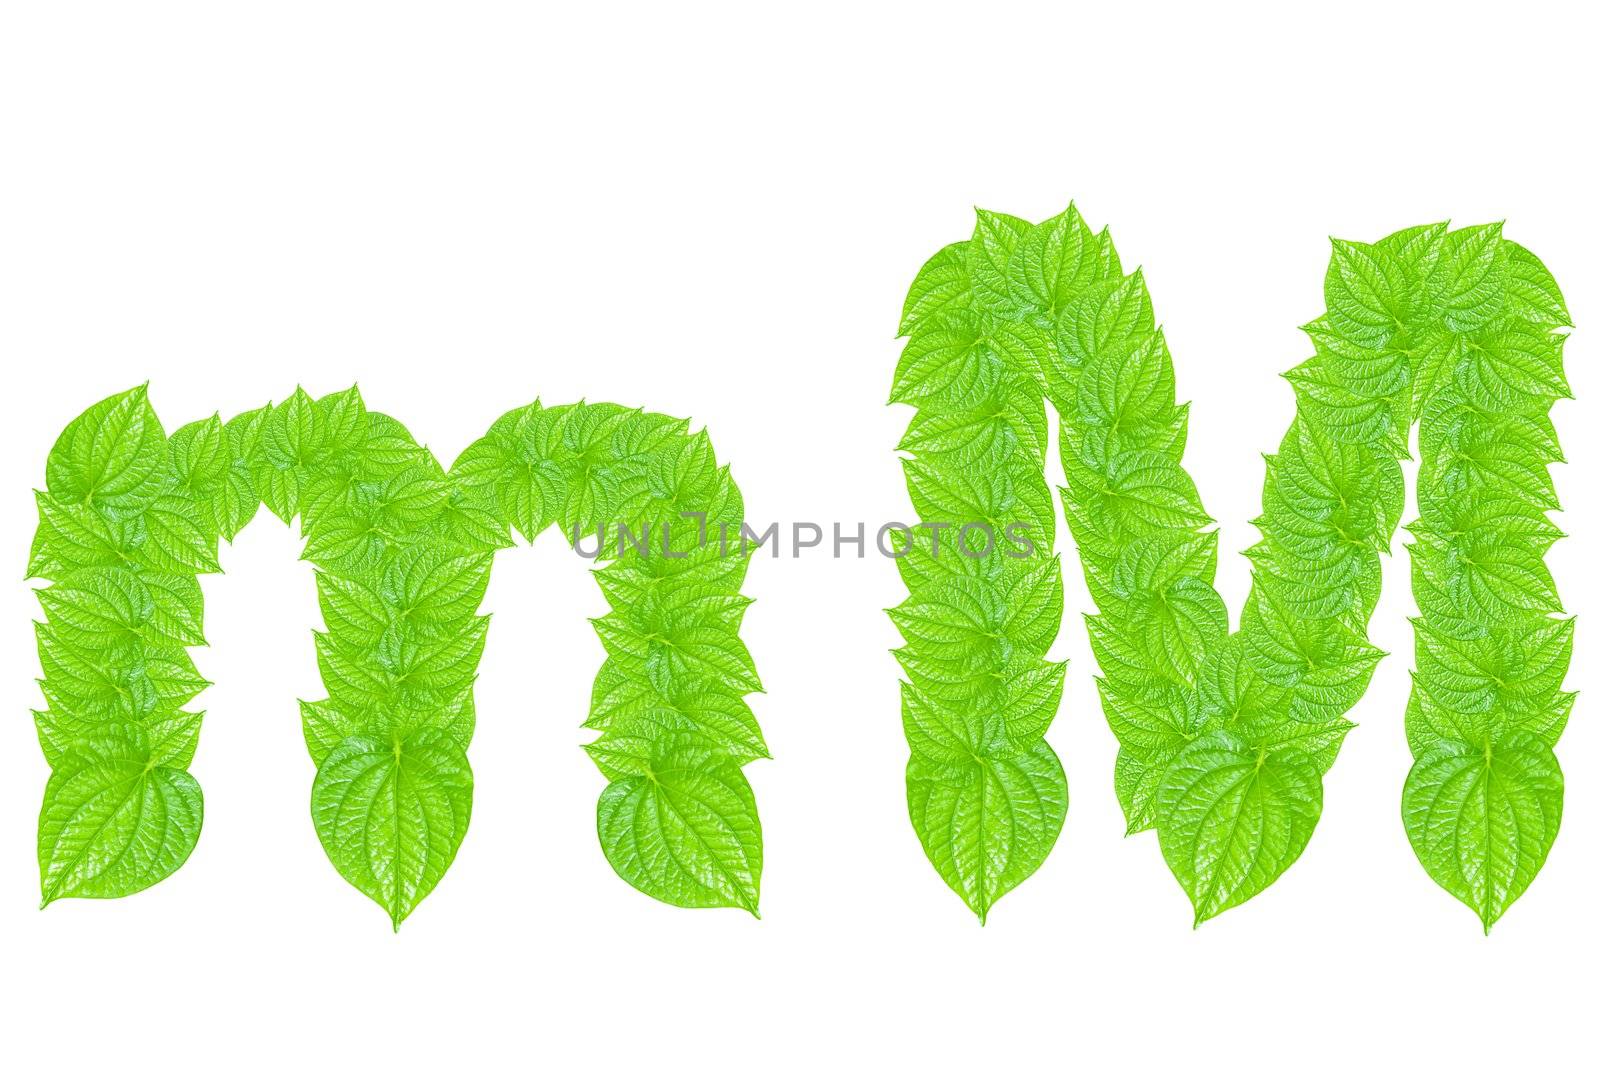 English alphabet made from green leafs with letter M in small capital and large capital letter